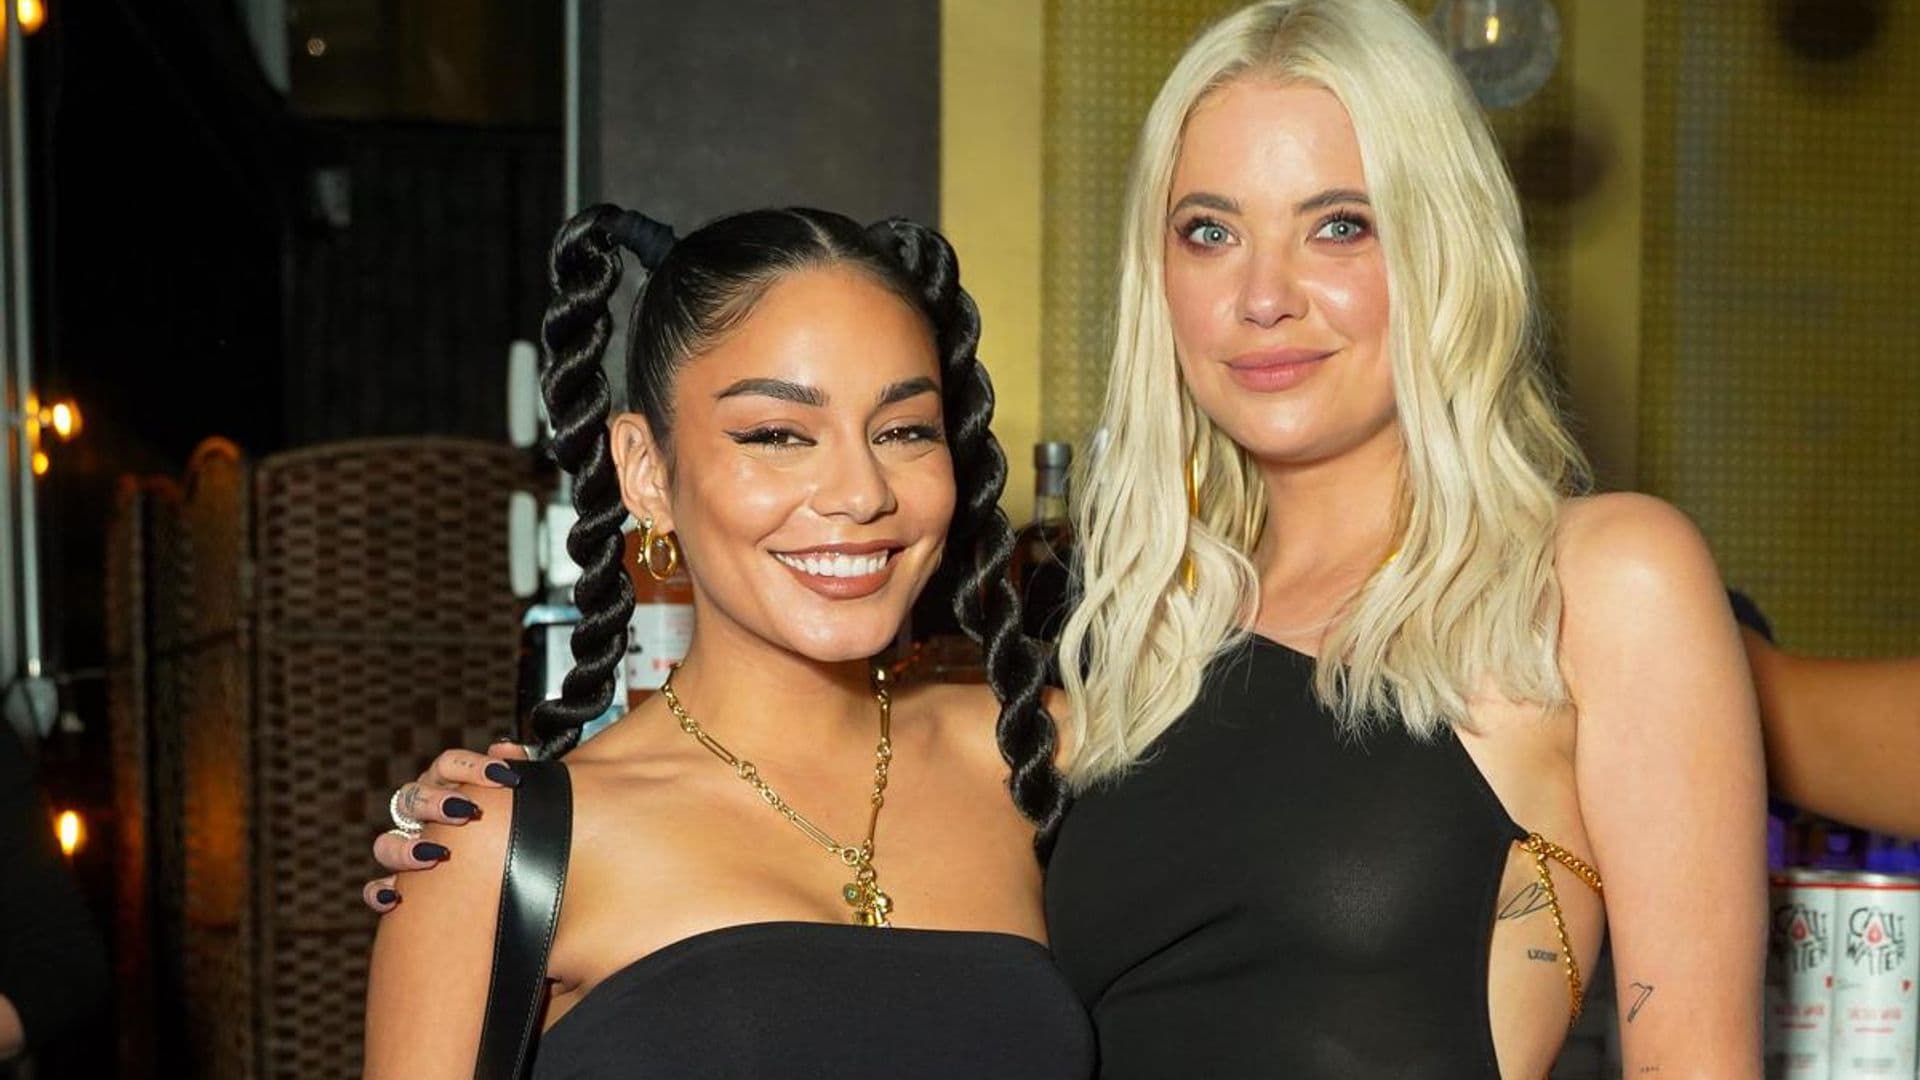 Vanessa Hudgens & Ashley Benson look amazing as they launch their cocktail brand